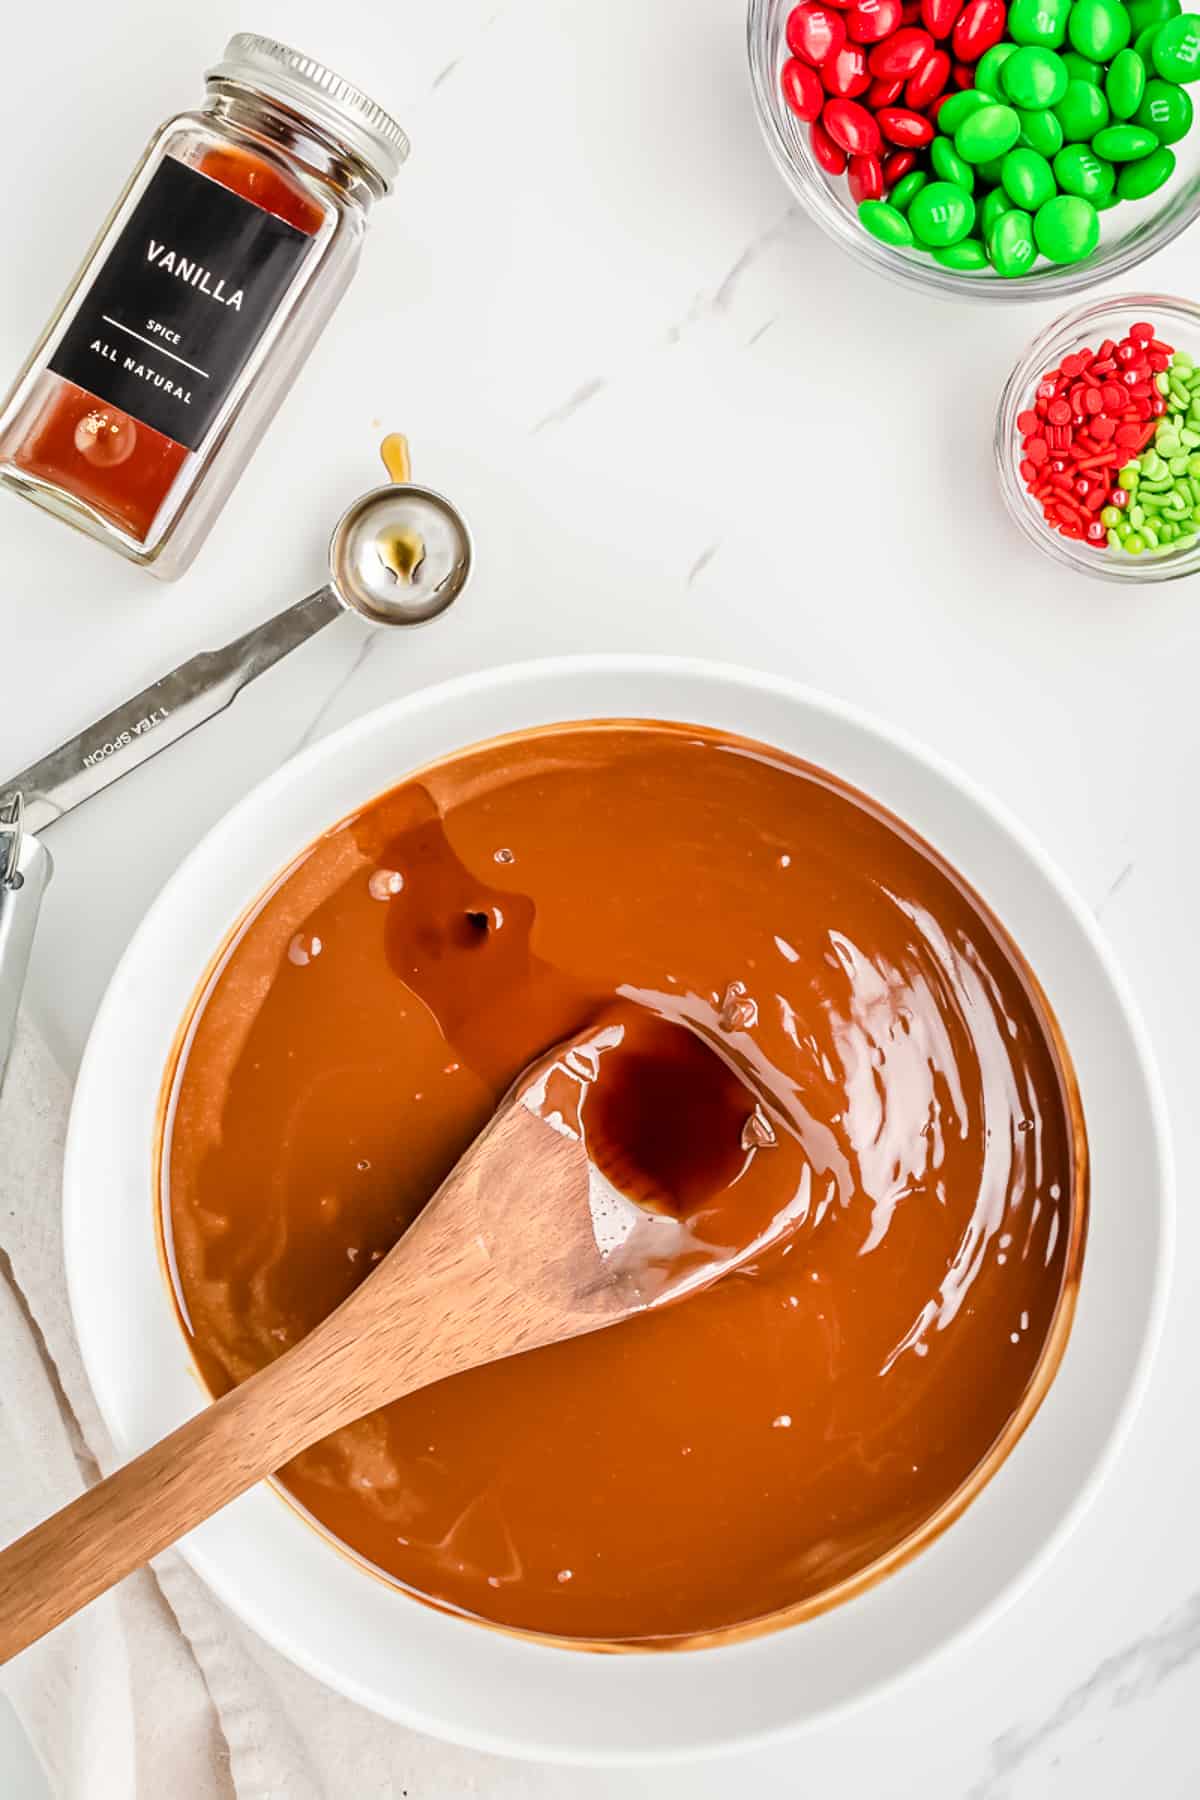 Vanilla being stirred on a wooden spoon into a chocolate peanut butter sauce in a large bowl from overhead with the vanilla bottle,  M&Ms and sprinkles in containers nearby.